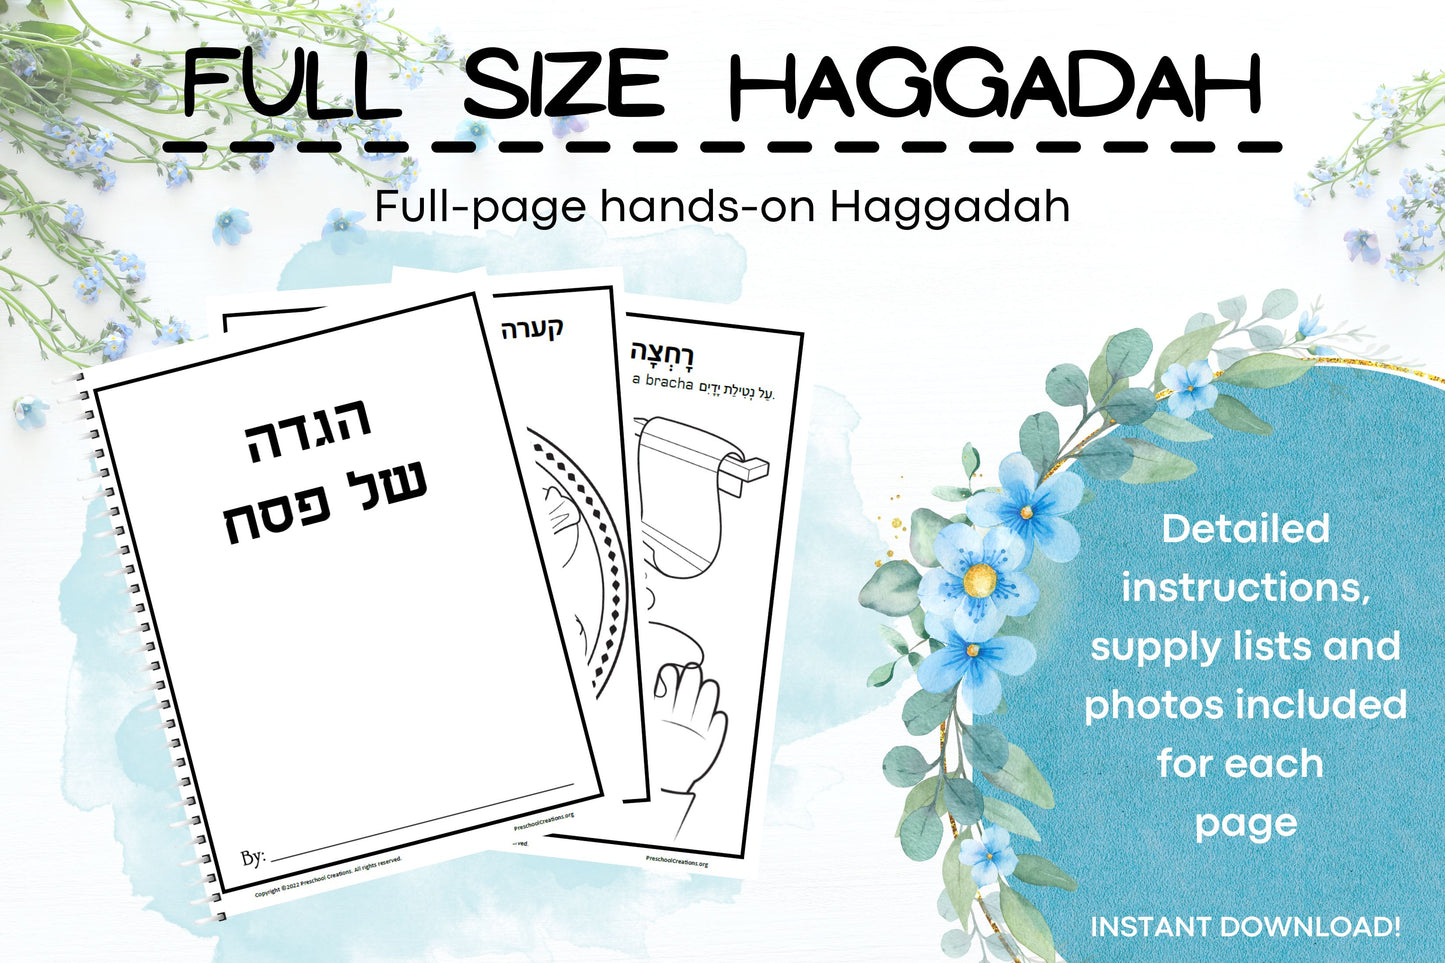 A 30 Page Beautiful Full-Size Passover Haggadah 3 Pages of instructions, ideas and supplies needed for each page 2 Pages of photo ideas for each step of the seder 3 pages of sample photos of each page so you can see how it should look 3 different versions of the Ma Nishtana (Chabad Yiddish, Chabad Hebew and Regular) so you can print whichever is your custom.